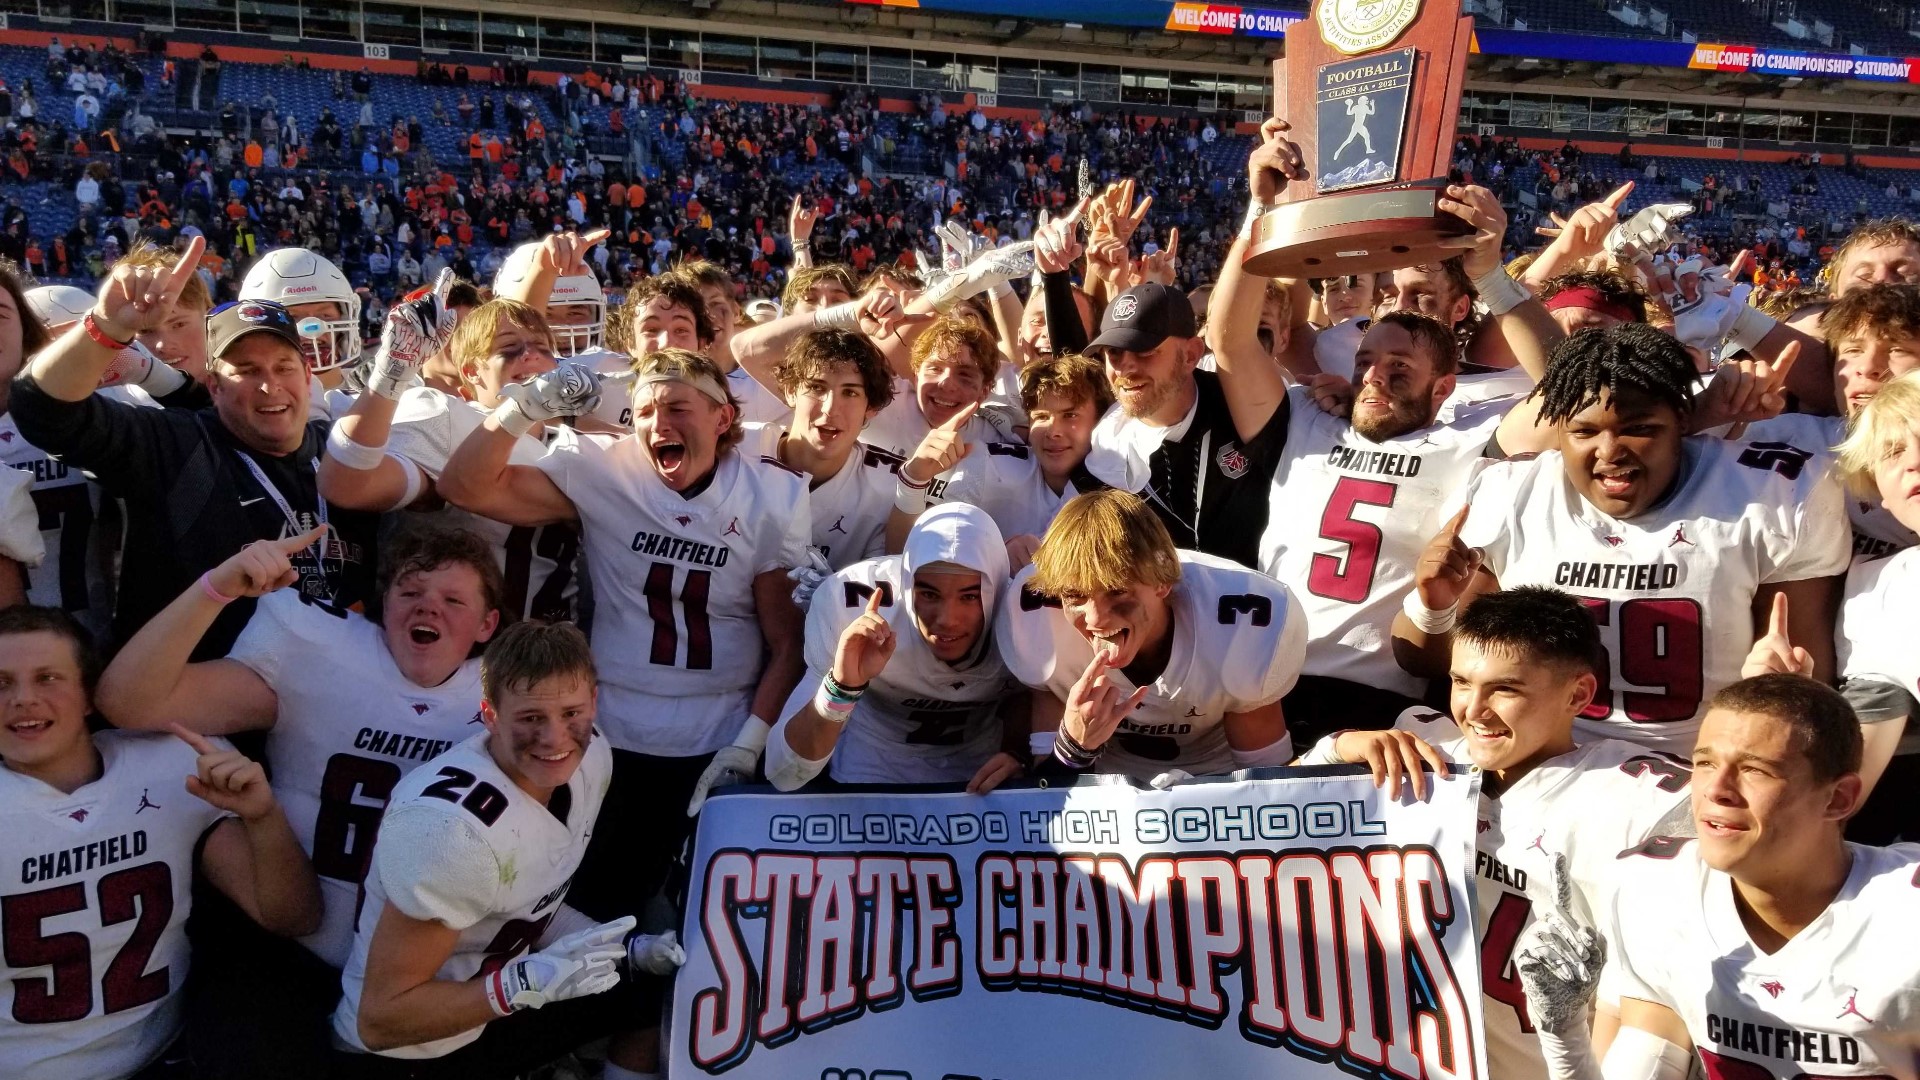 The Chargers captured their first football state title in 20 years on Saturday.